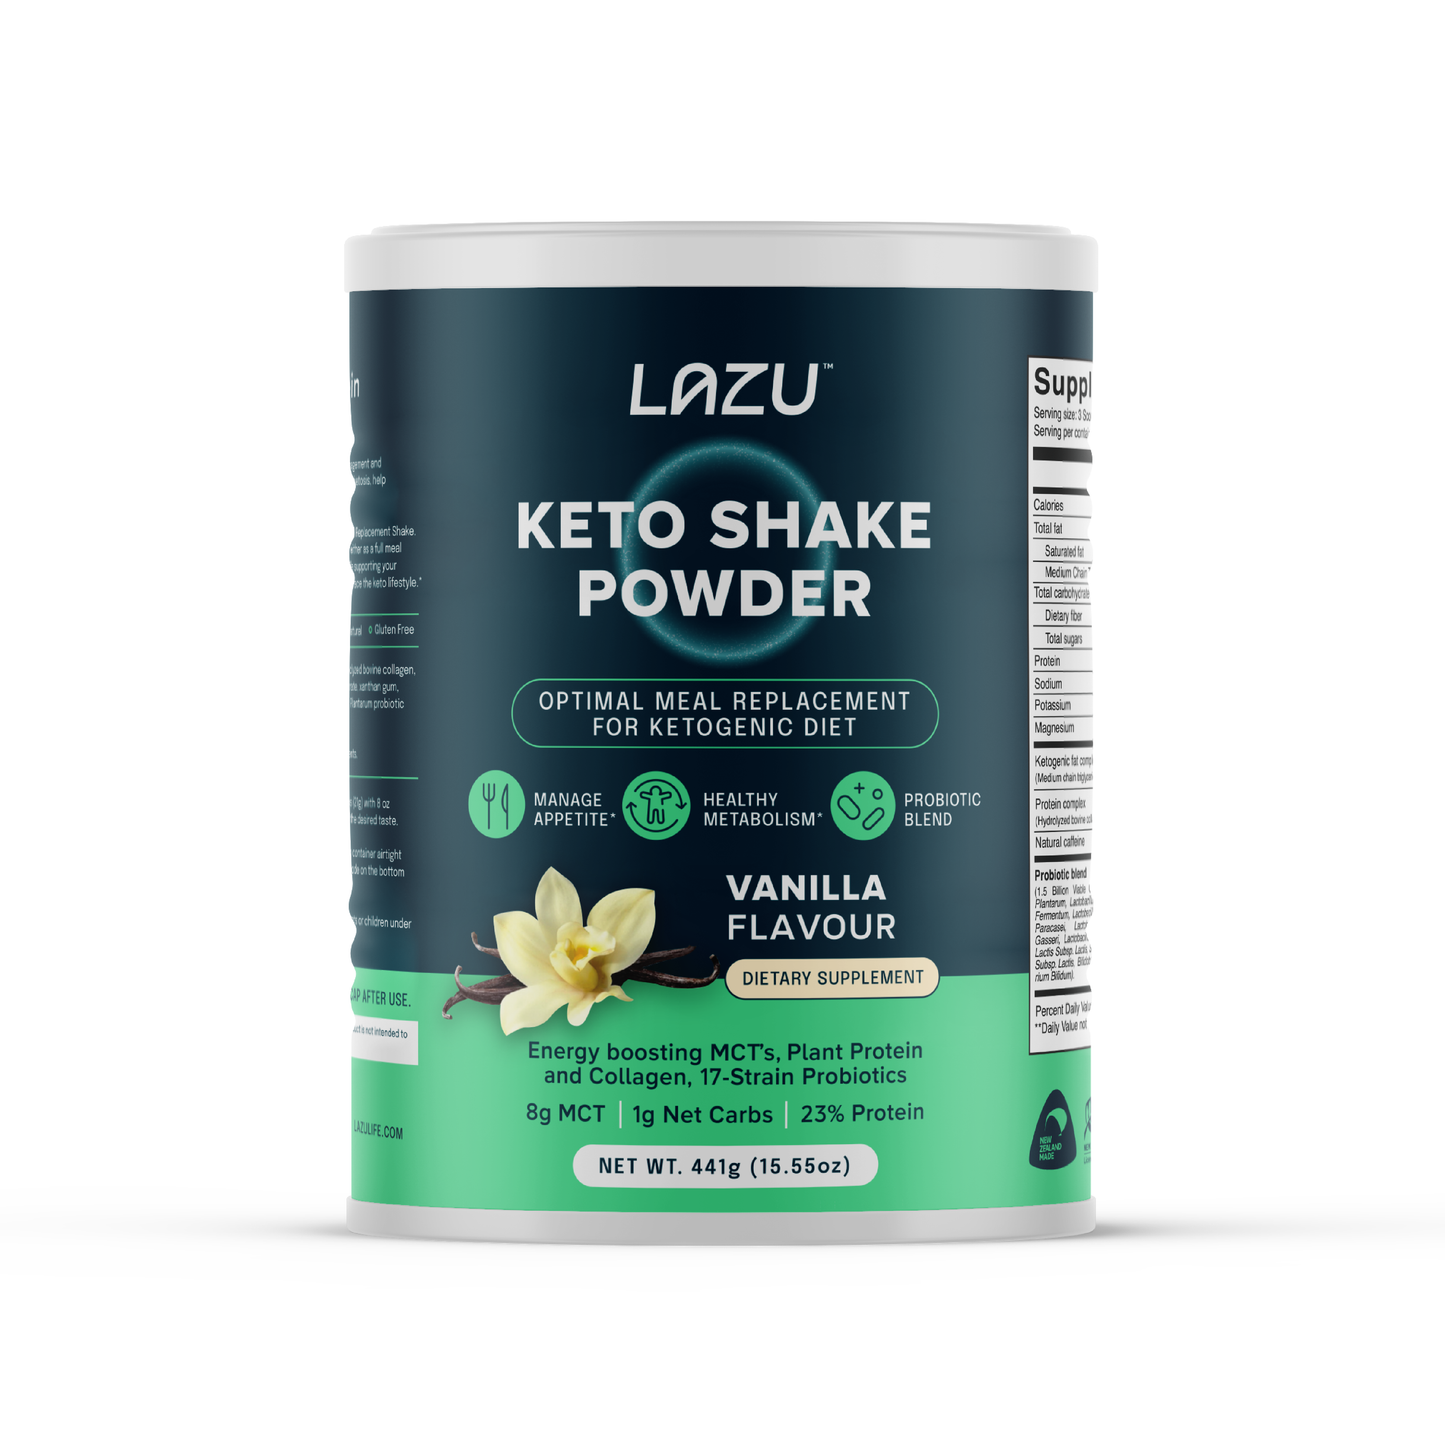 KETO SHAKE - Optimal meal replacement for Ketogenic diets